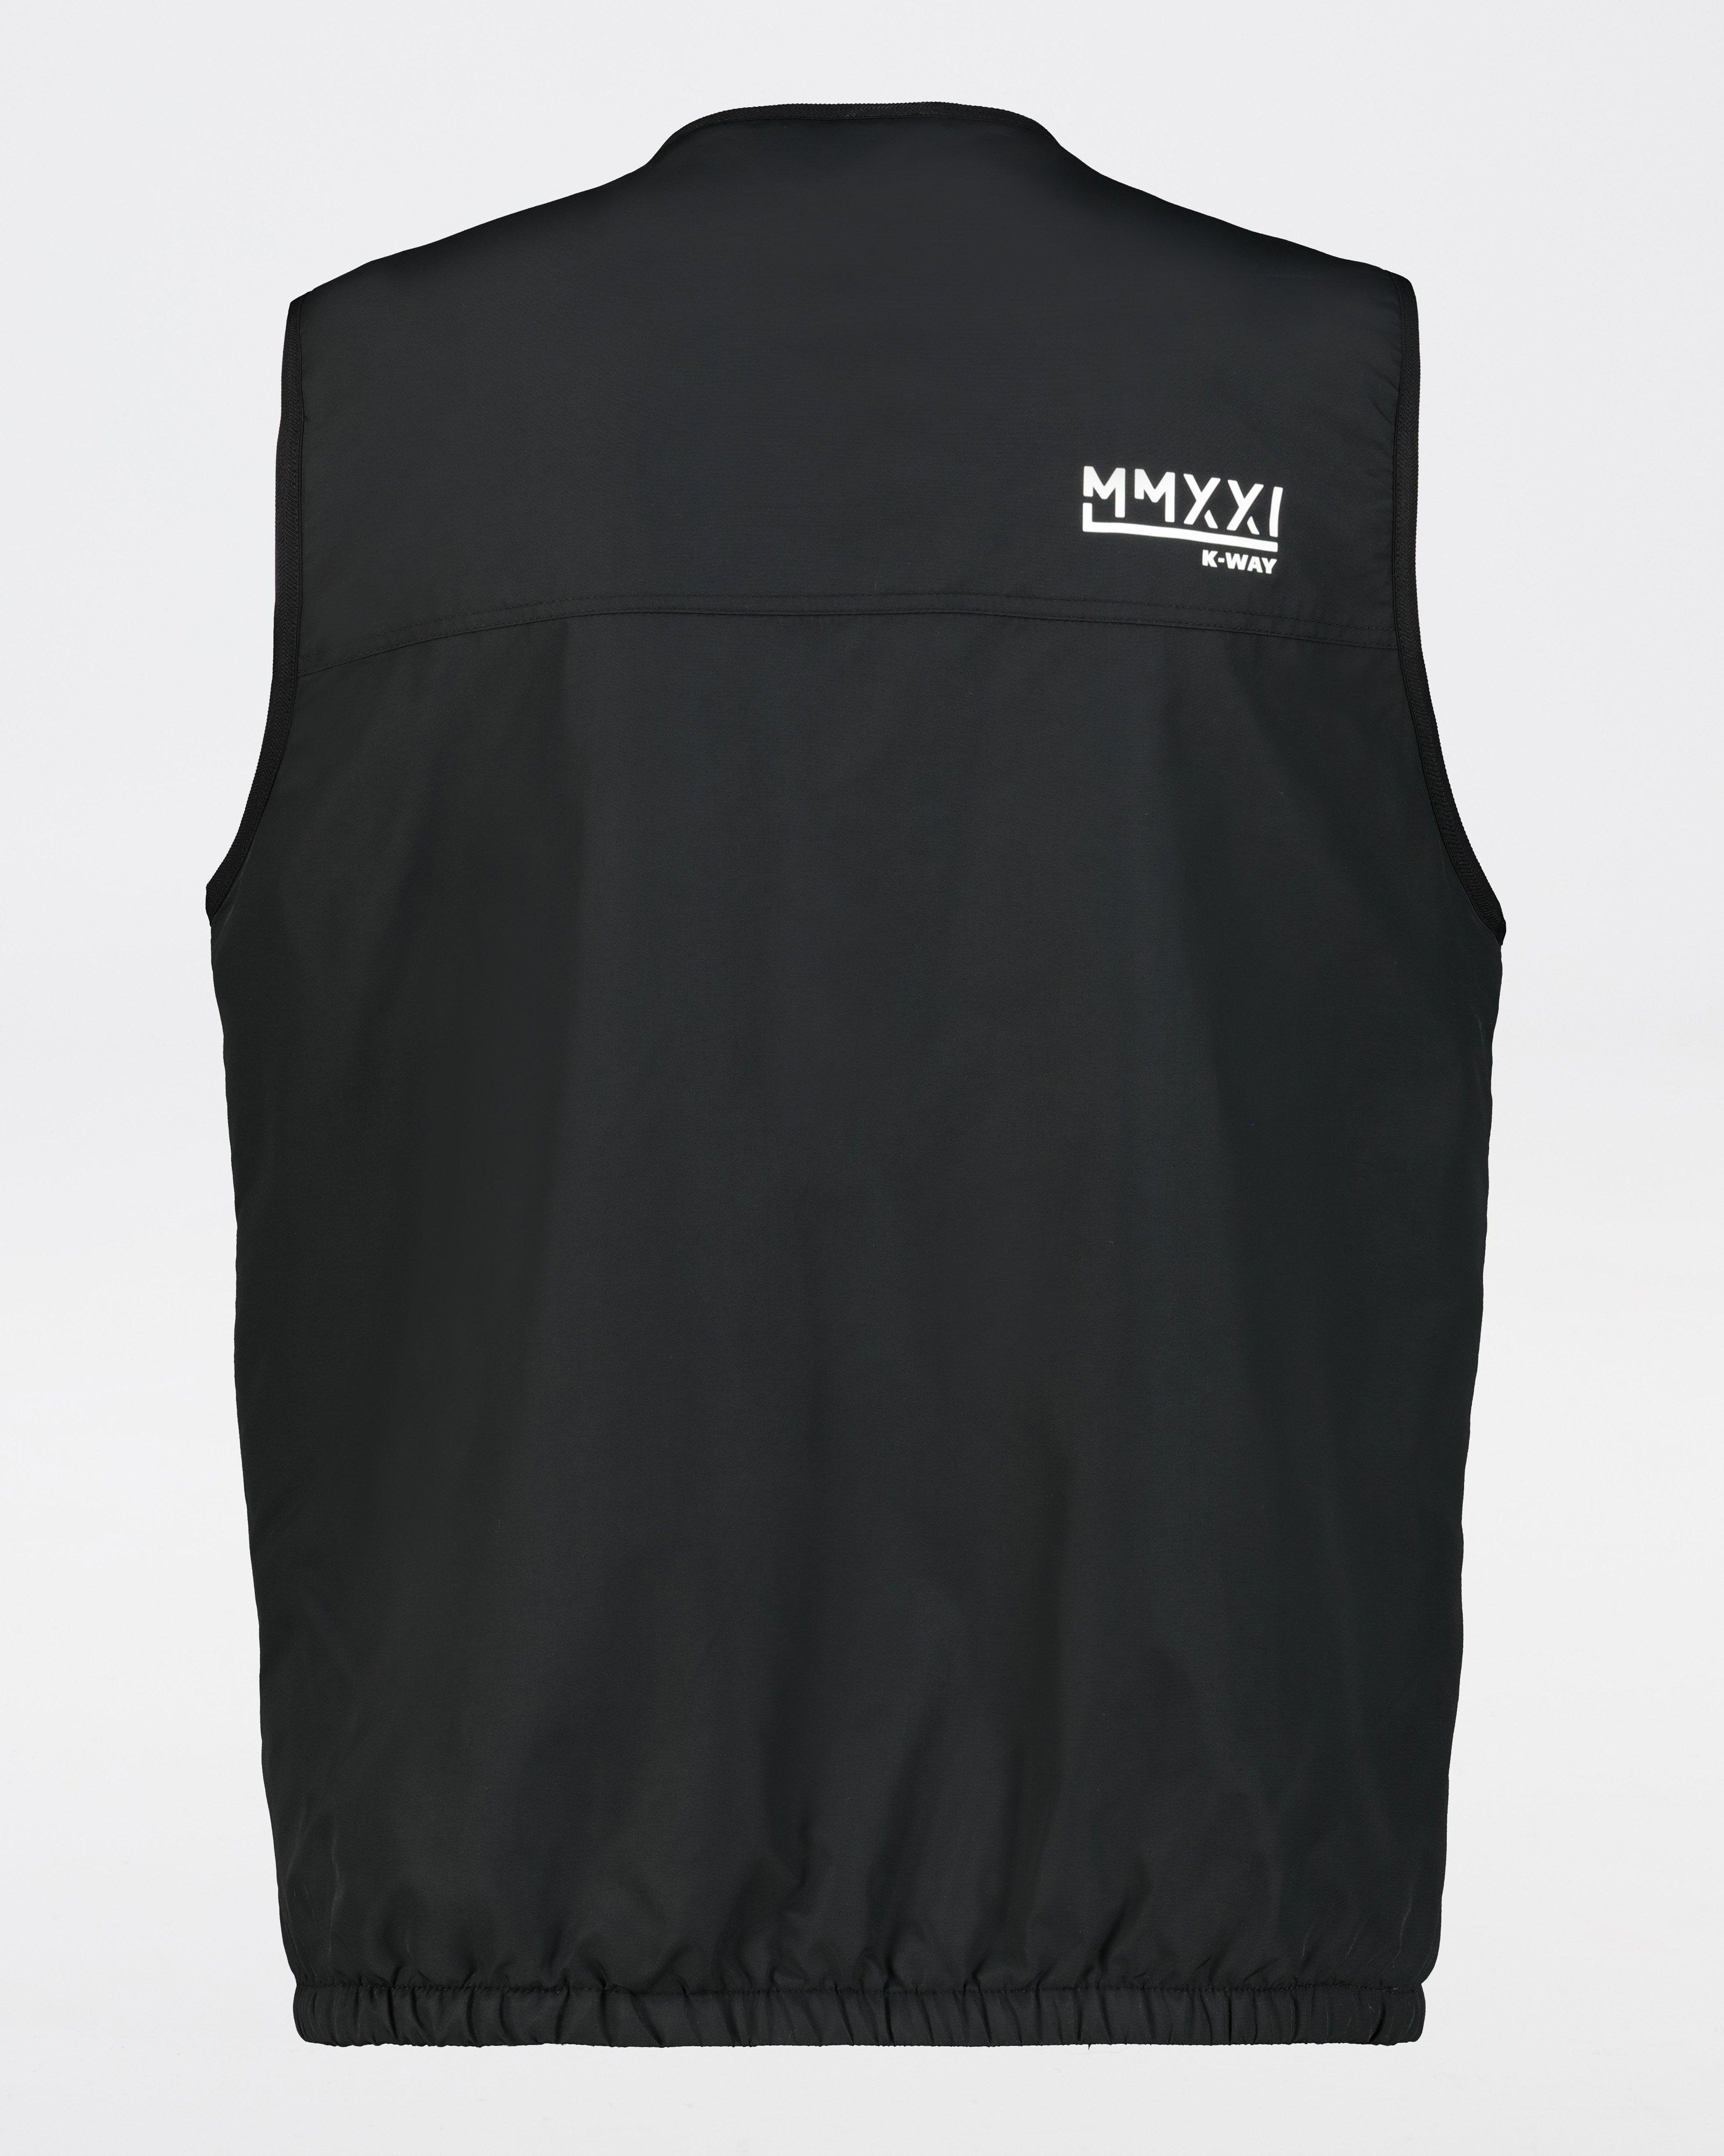 K-Way MMXXI Men’s Insulated Utility Vest  -  Black